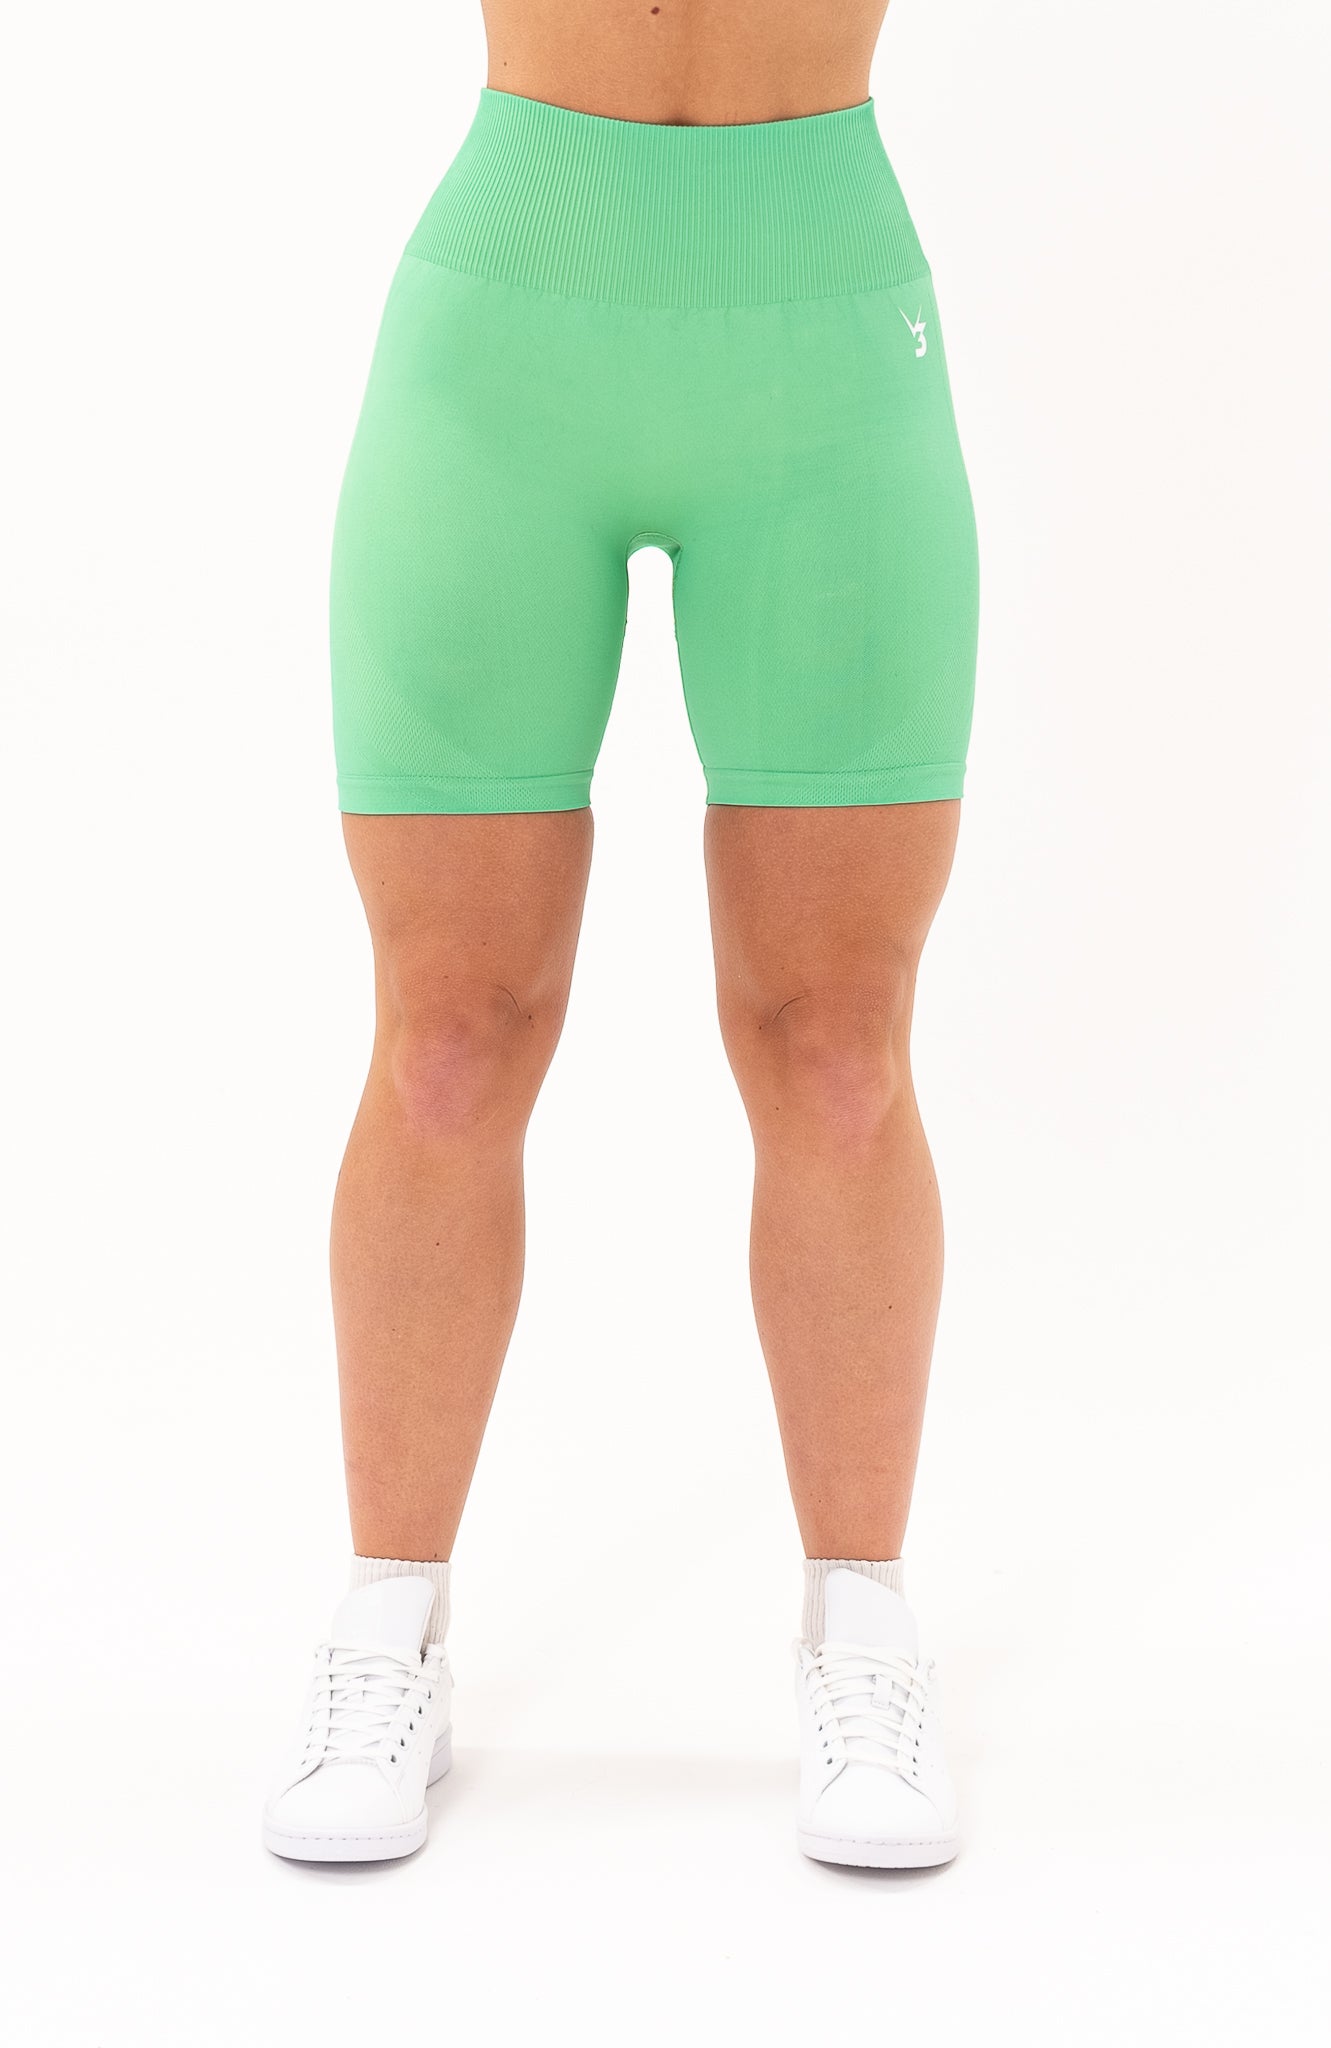 redbaysand Women's seamless Limitless high waisted cycle shorts in mint green – Squat proof 5 inch inseam leg bum enhancing shorts for Gym workouts training, Running, yoga, bodybuilding and bikini fitness.